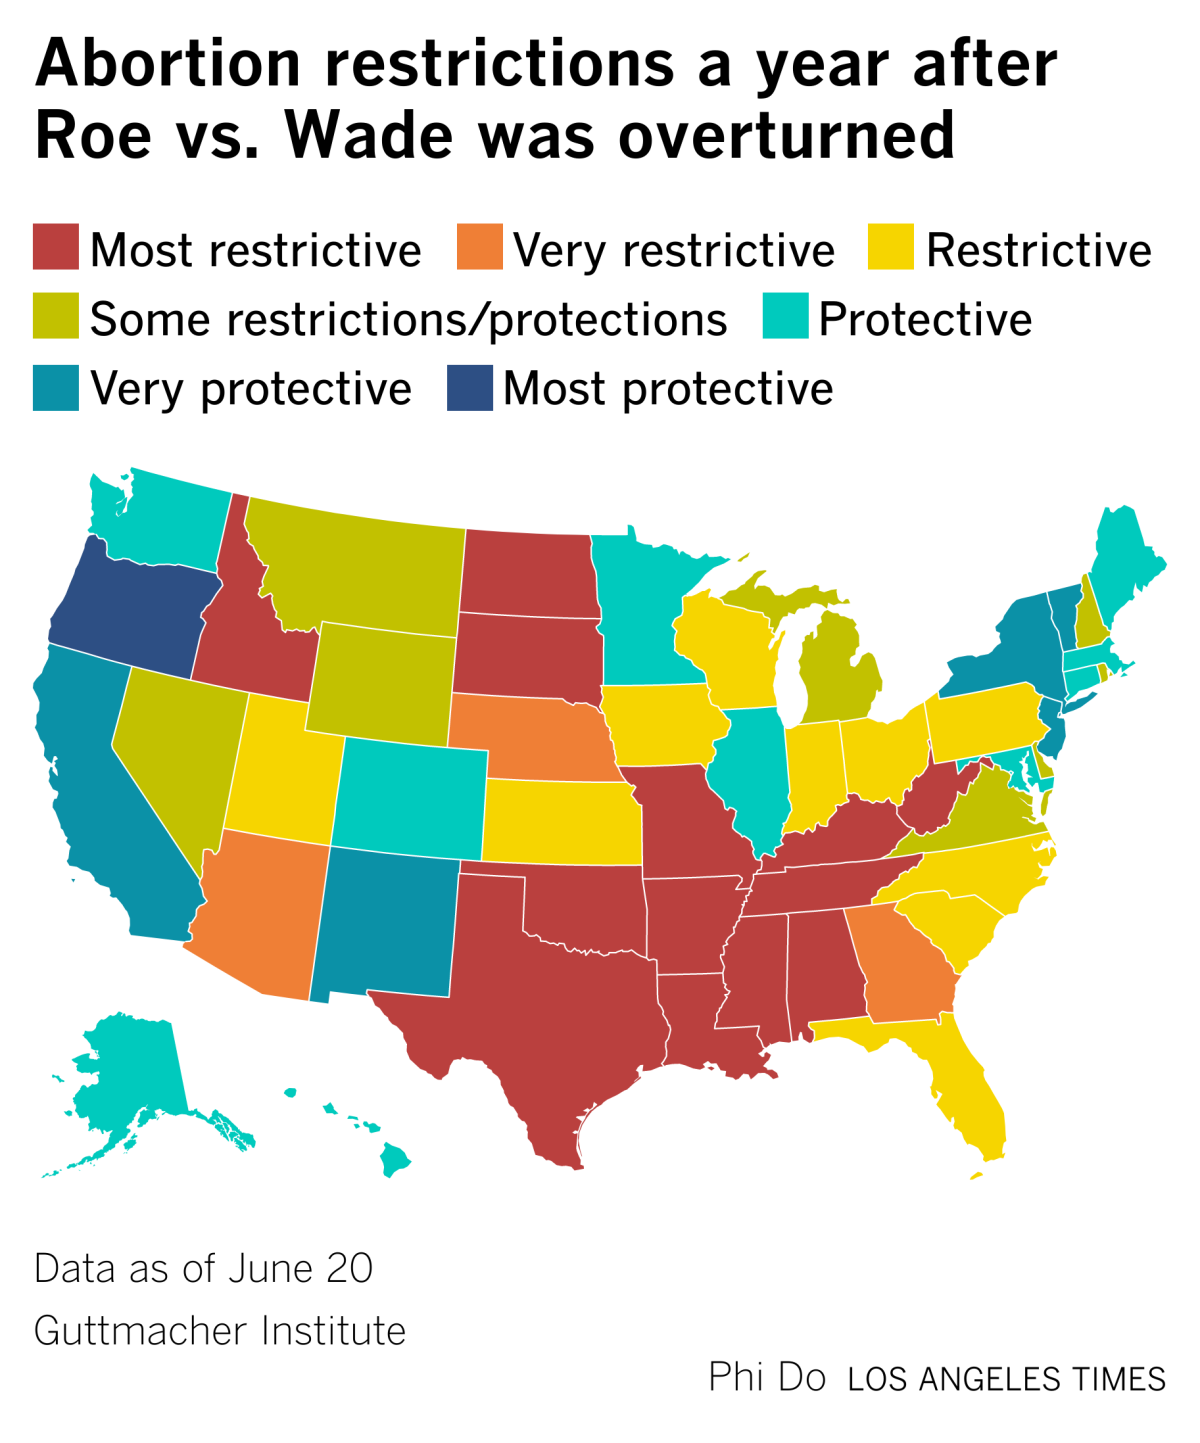 Map showing abortion restrictions a year after Roe vs. Wade was overturned